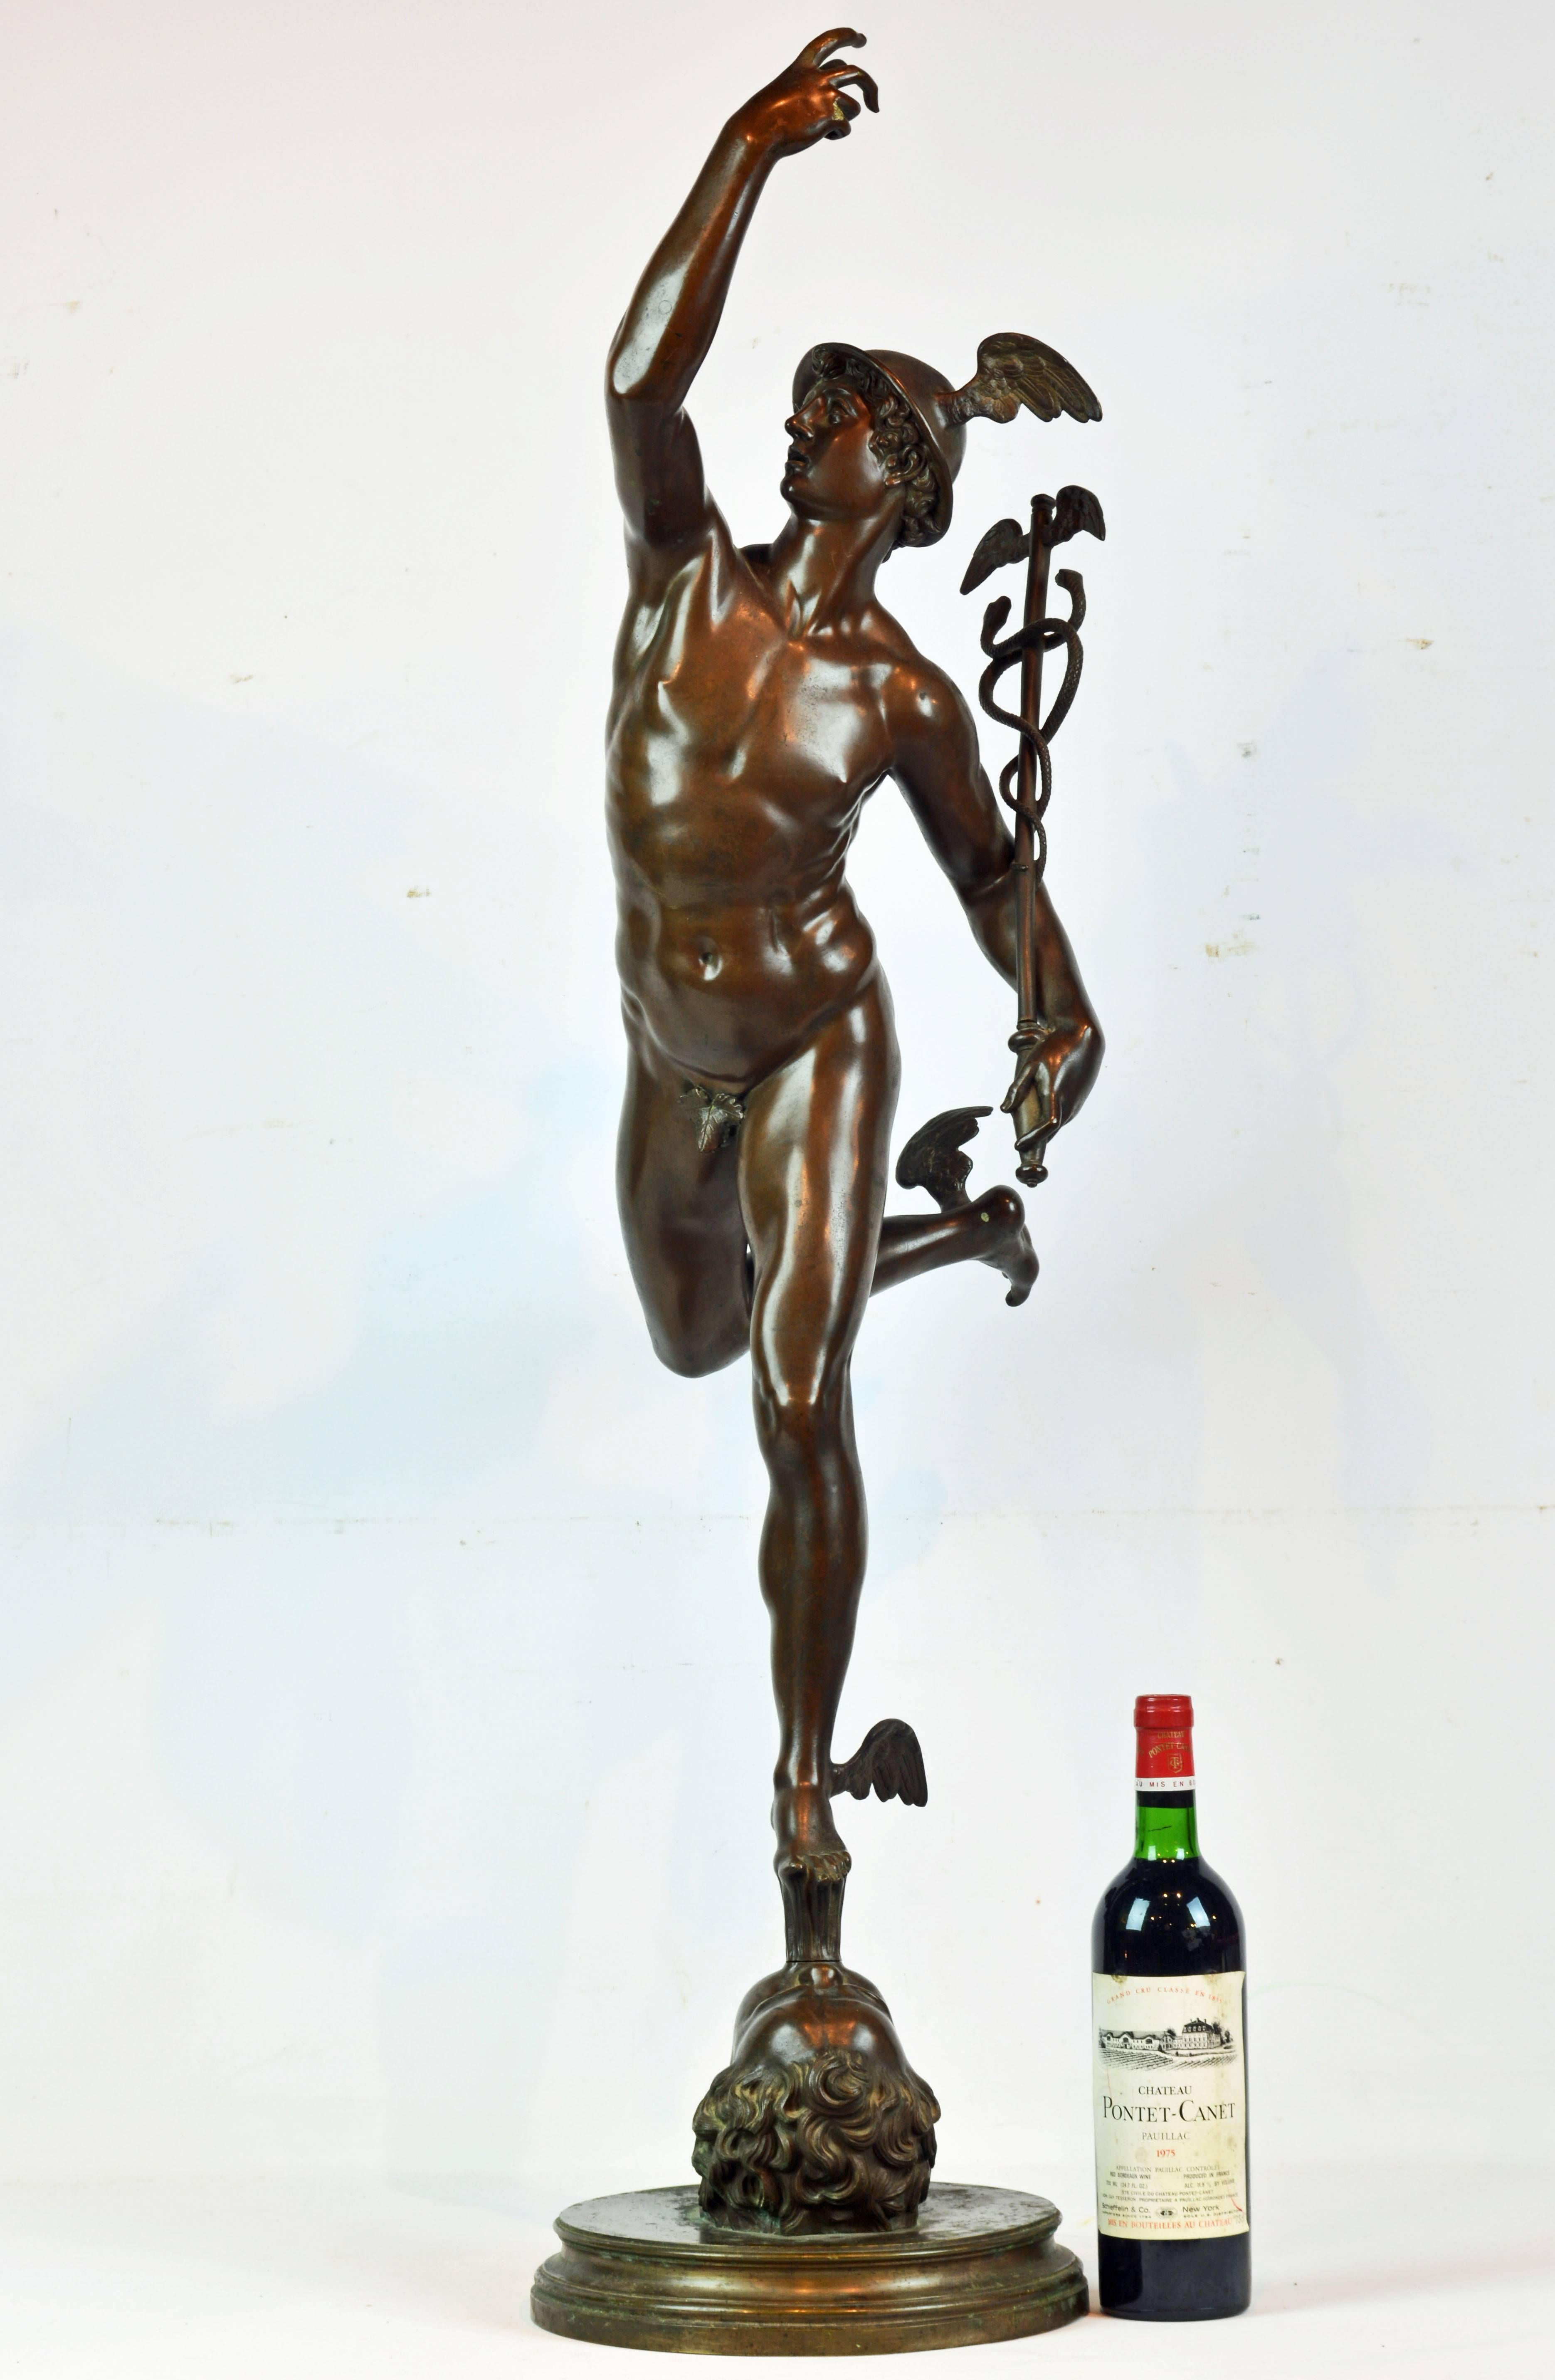 Standing almost 44 inches tall and raised on a circular molded base Mercury (or Greek: Hermes) stands balancing on an allegory of the North Wind in a powerful pose holding the 'caduceus' in his left hand. The statue is modeled after the original by